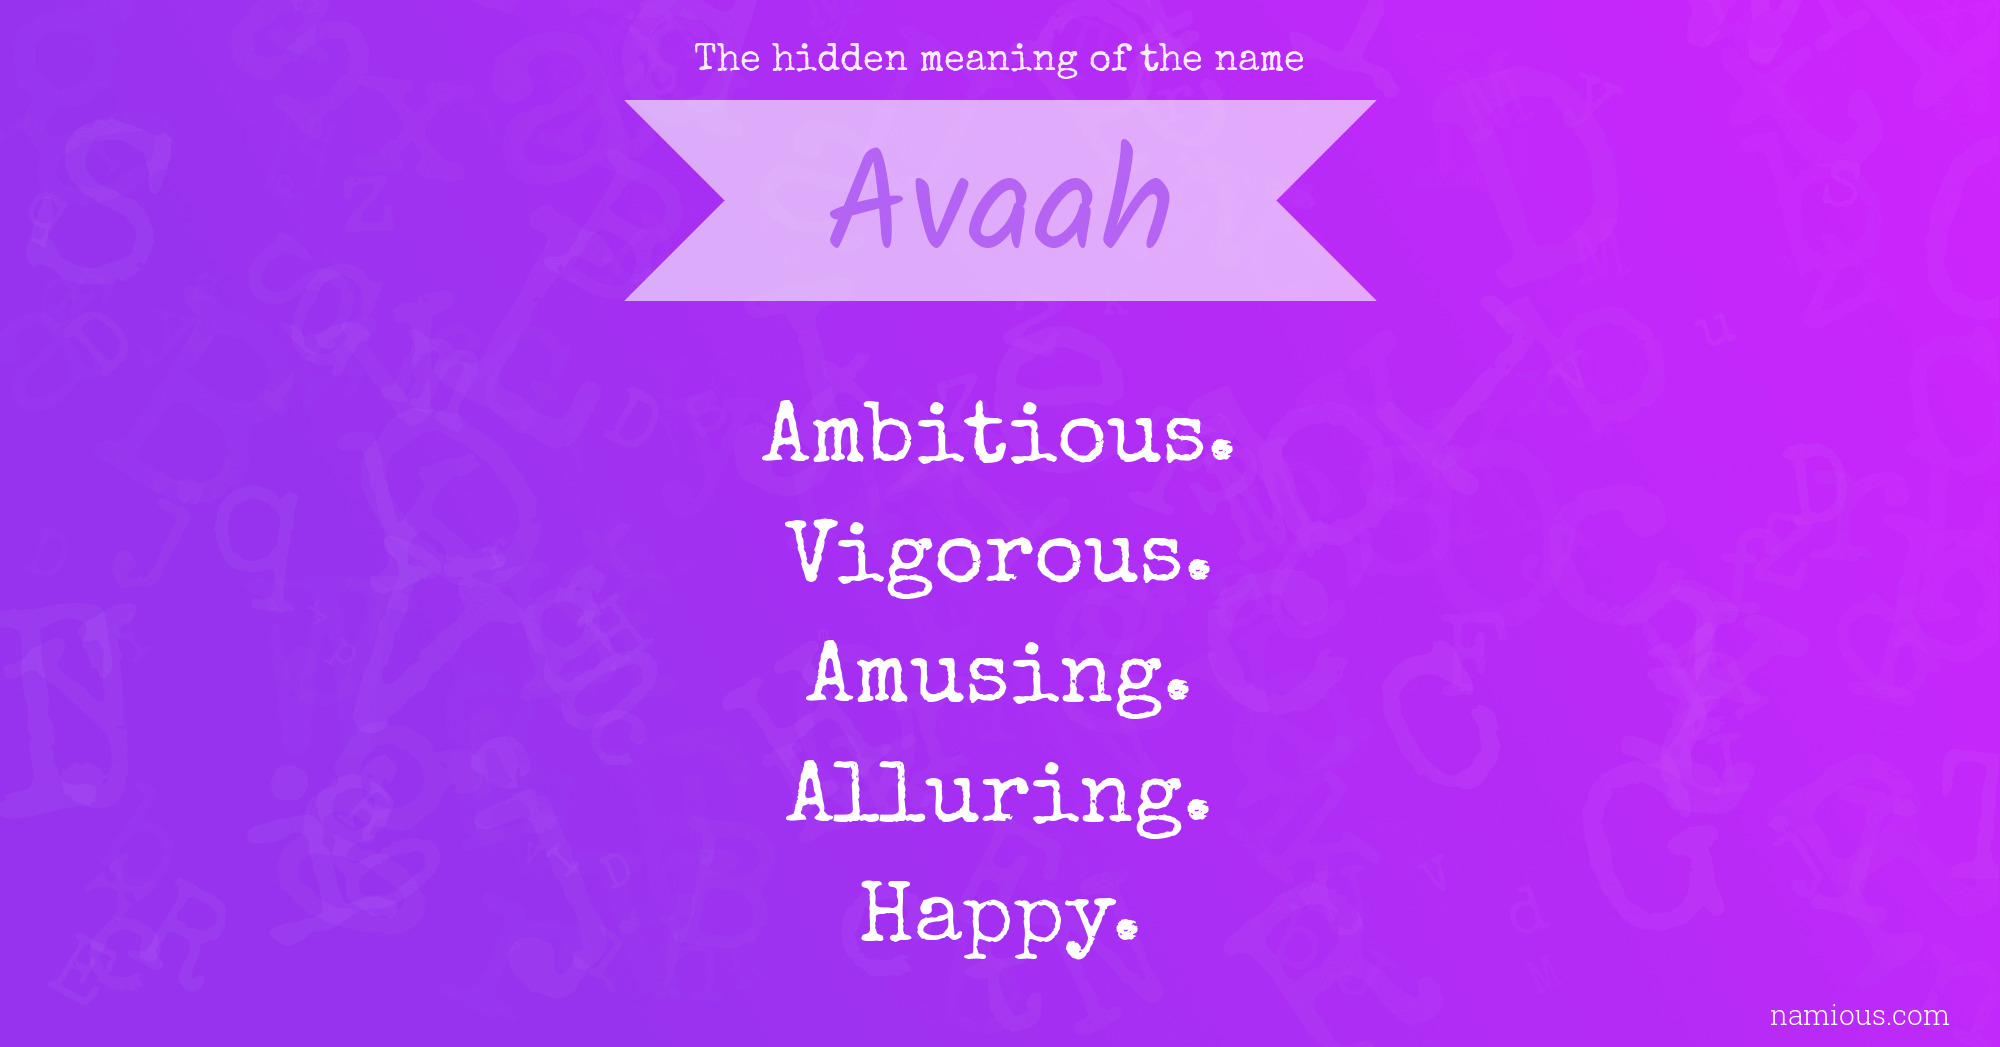 The hidden meaning of the name Avaah